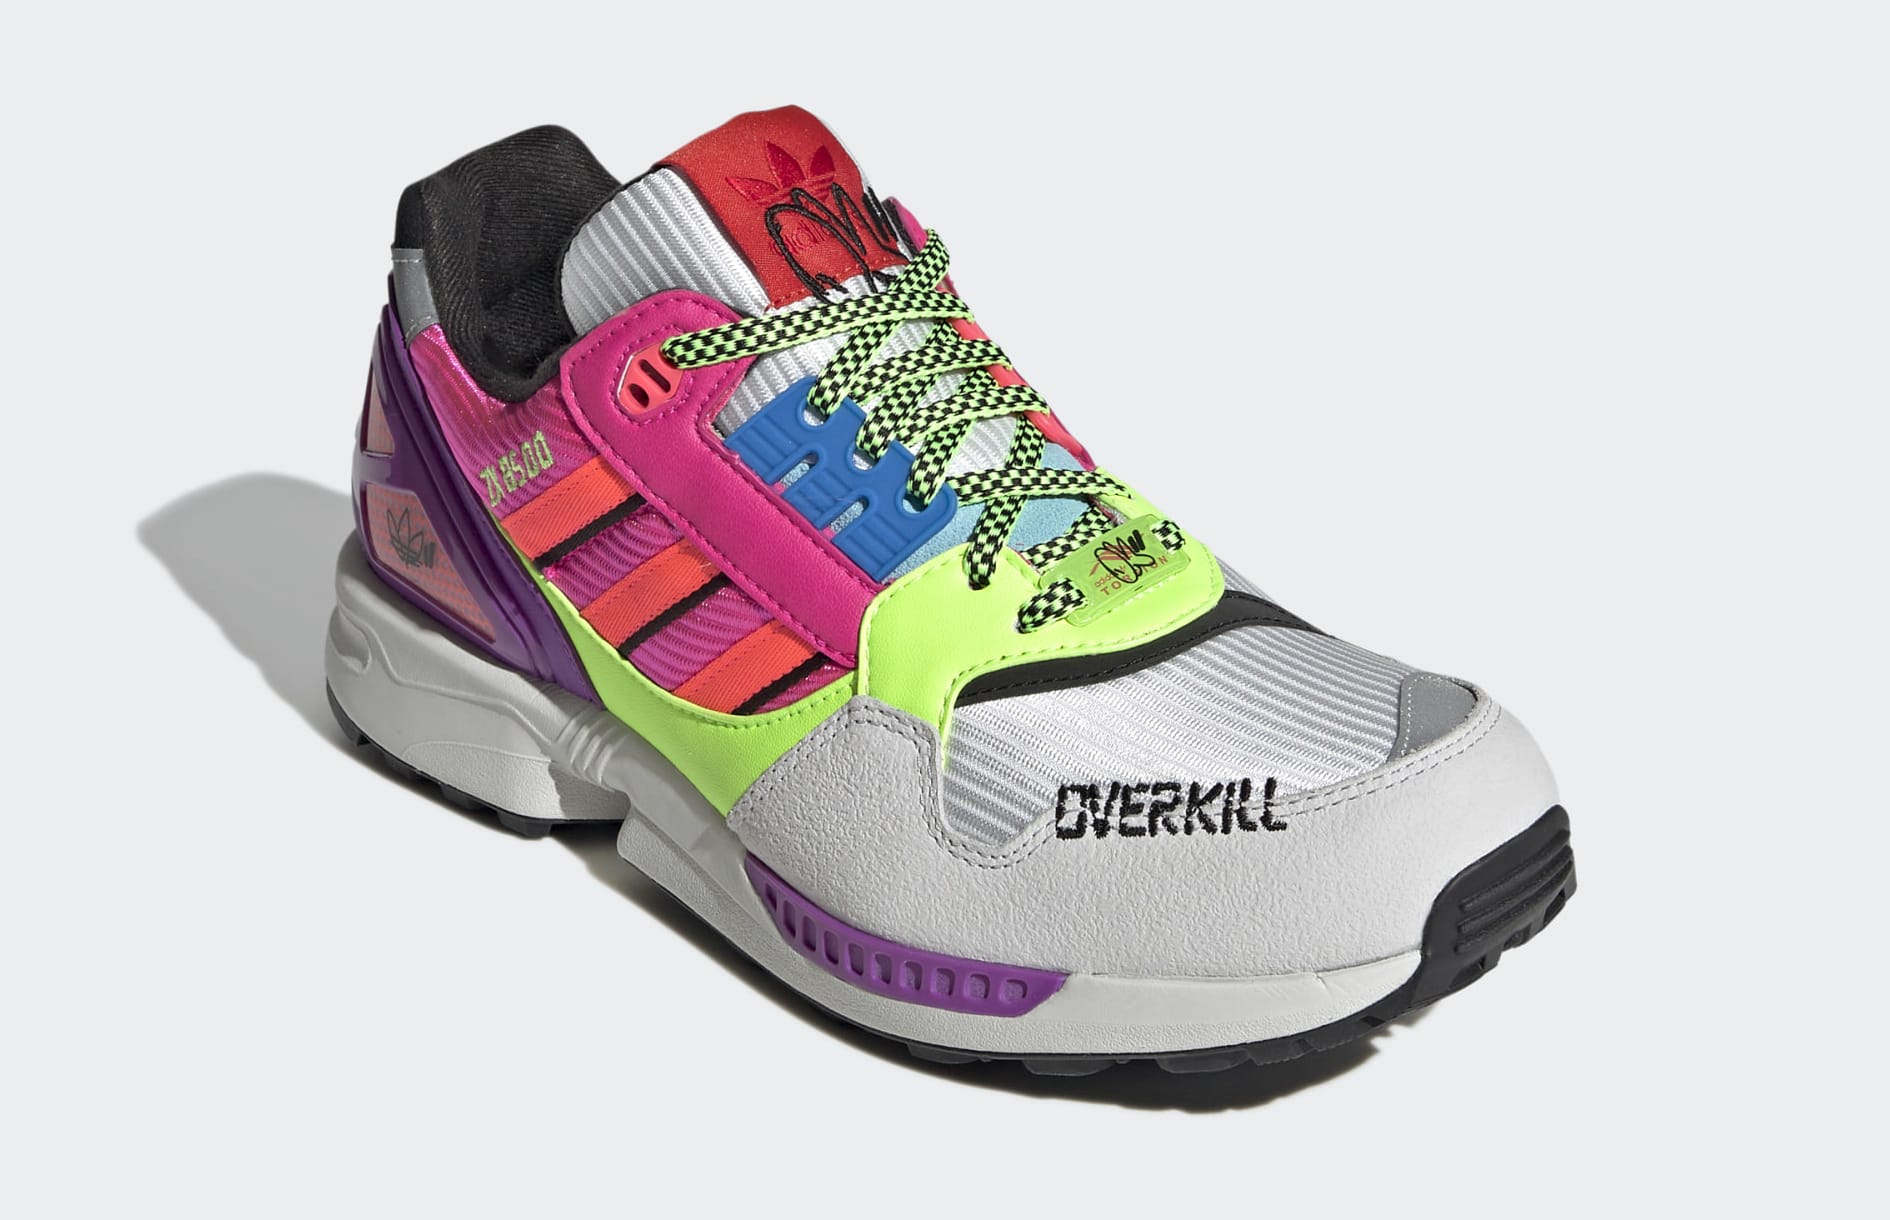 Overkill x Adidas ZX 8500 Medial Front